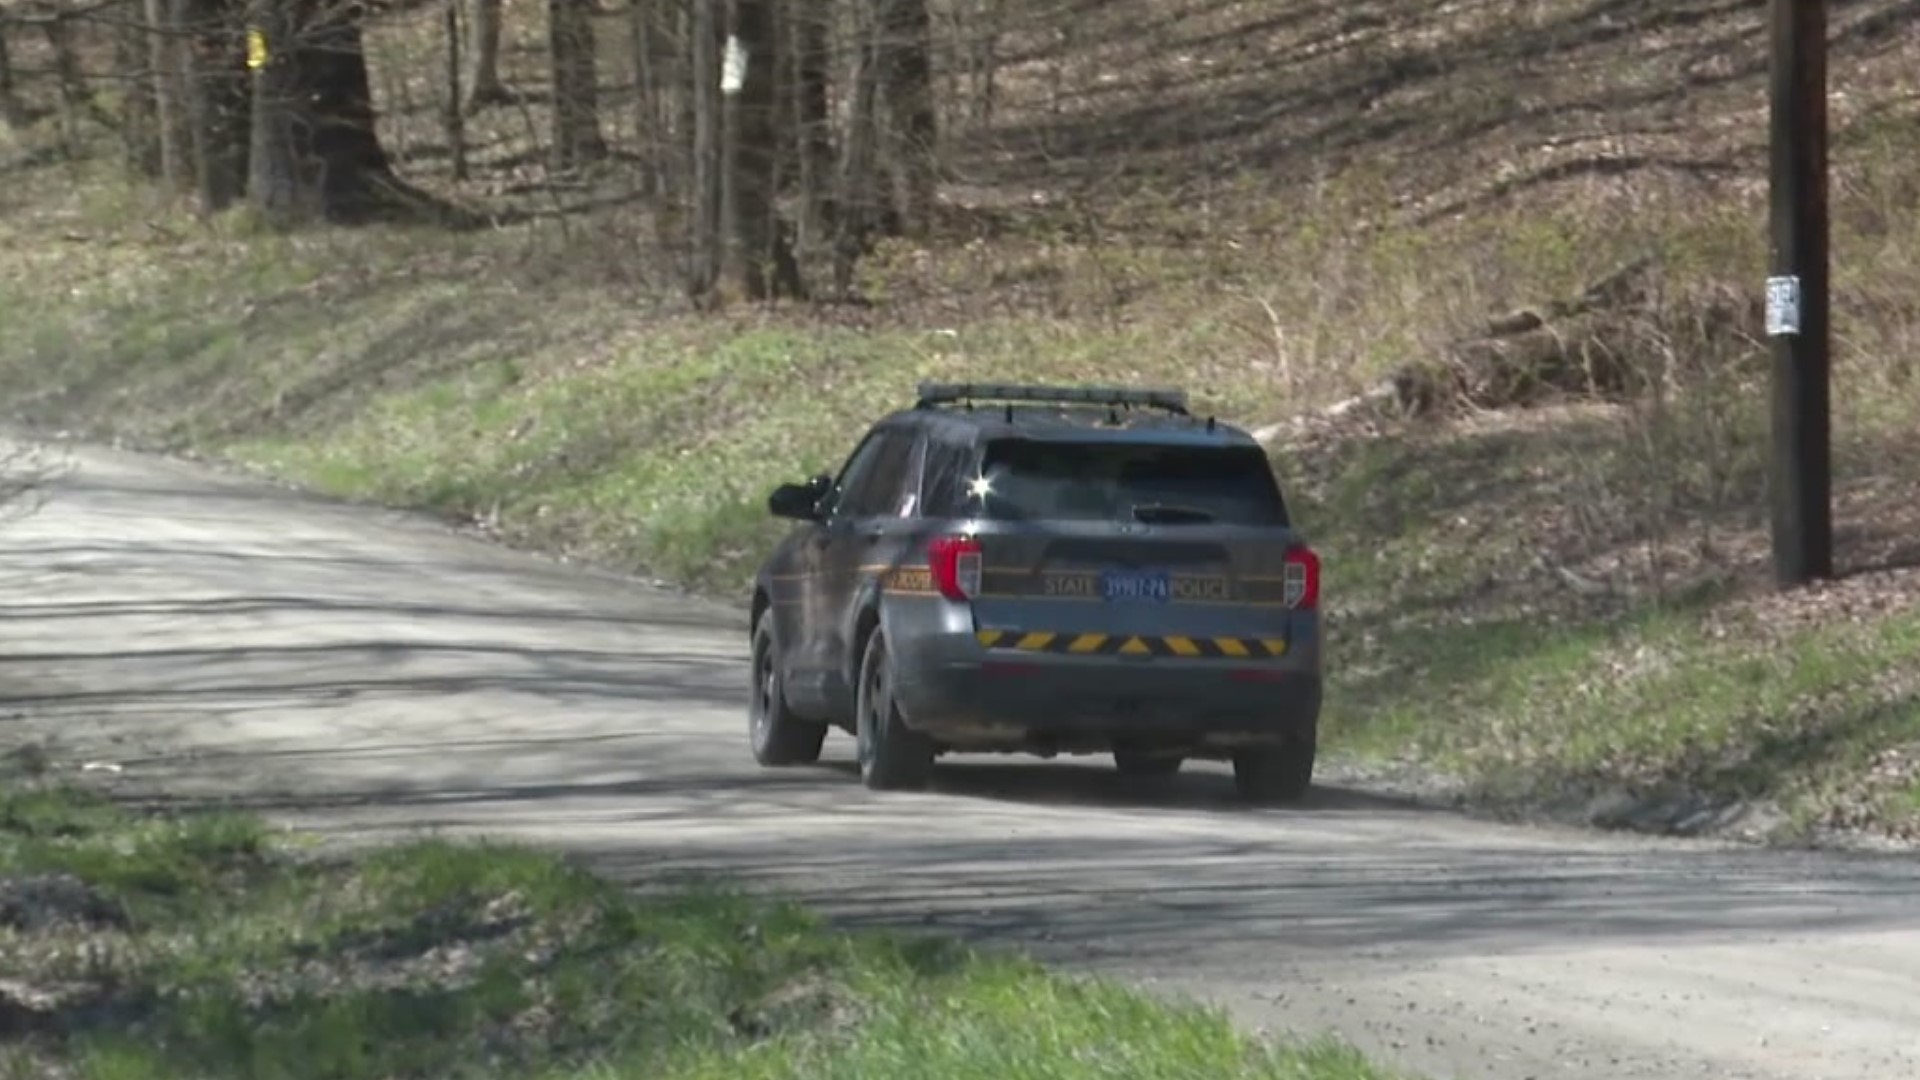 State police are investigating a string of burglaries near Montrose. Newswatch 16's Courtney Harrison spoke with people who live in the area who are concerned.